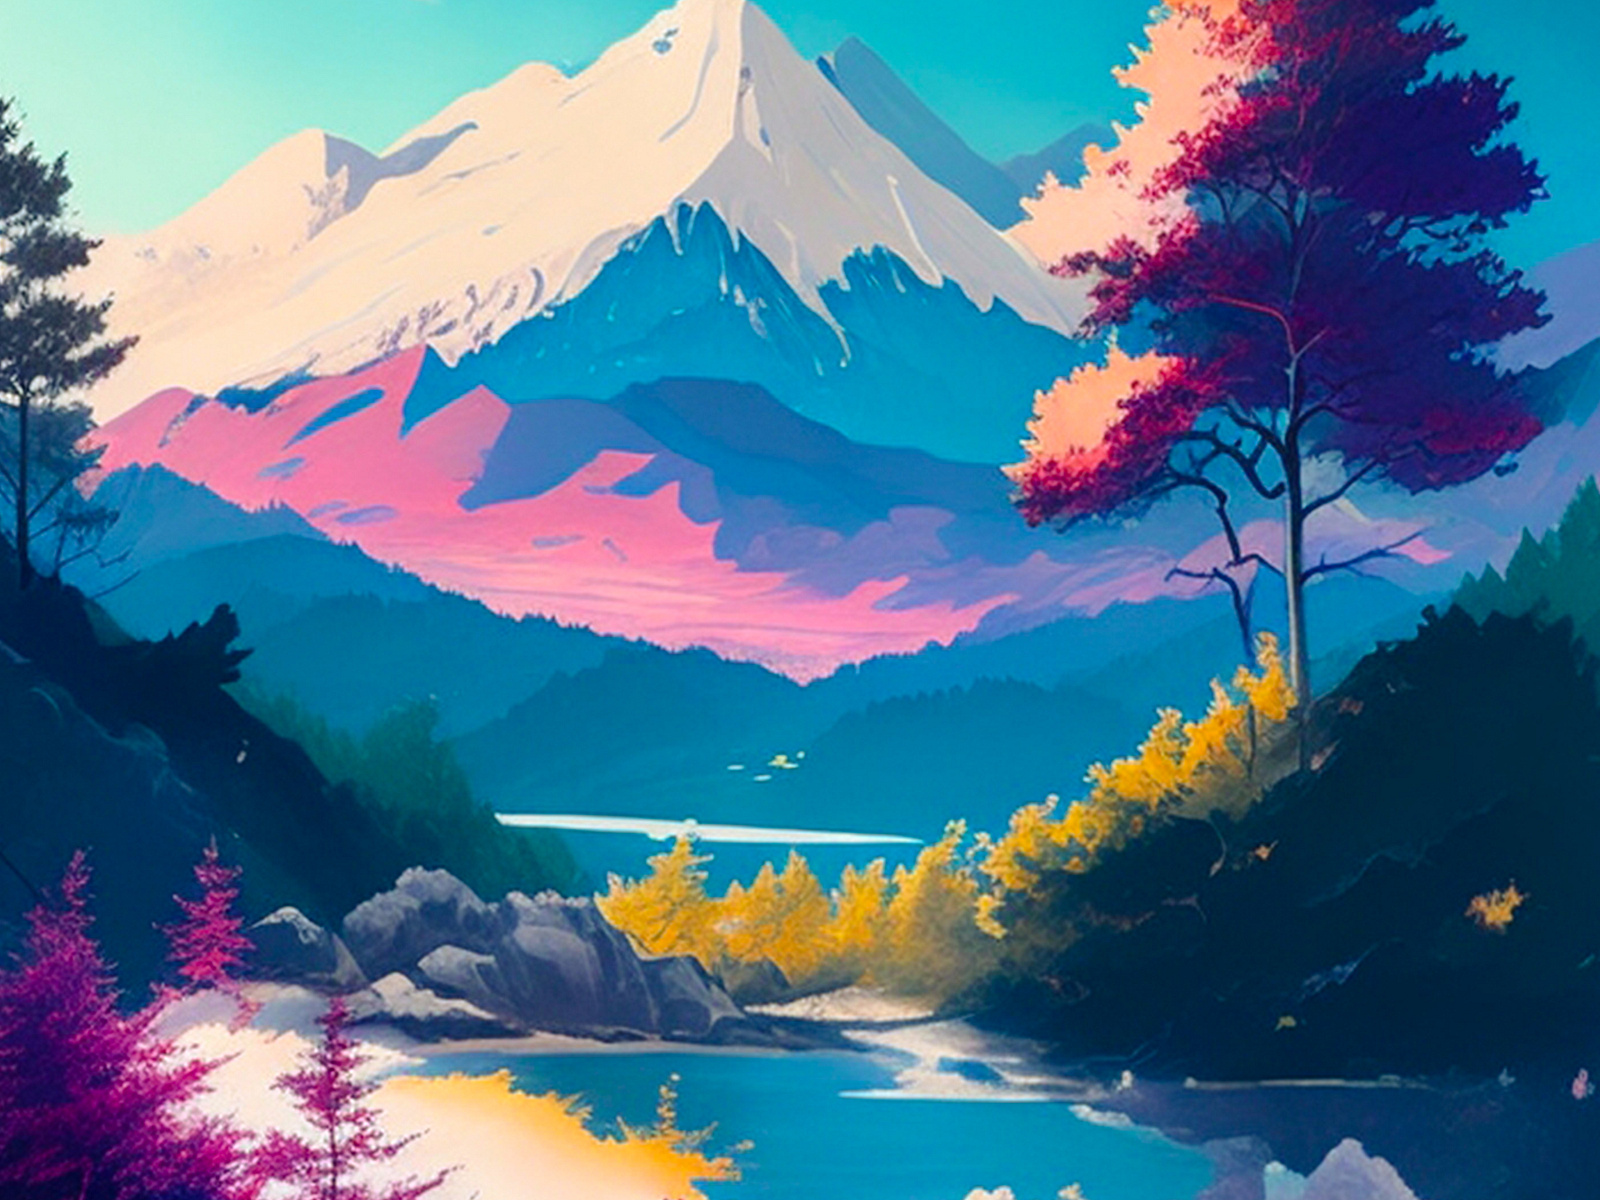 Tranquil Anime Landscape: Serenity and Beauty by Hachim on Dribbble